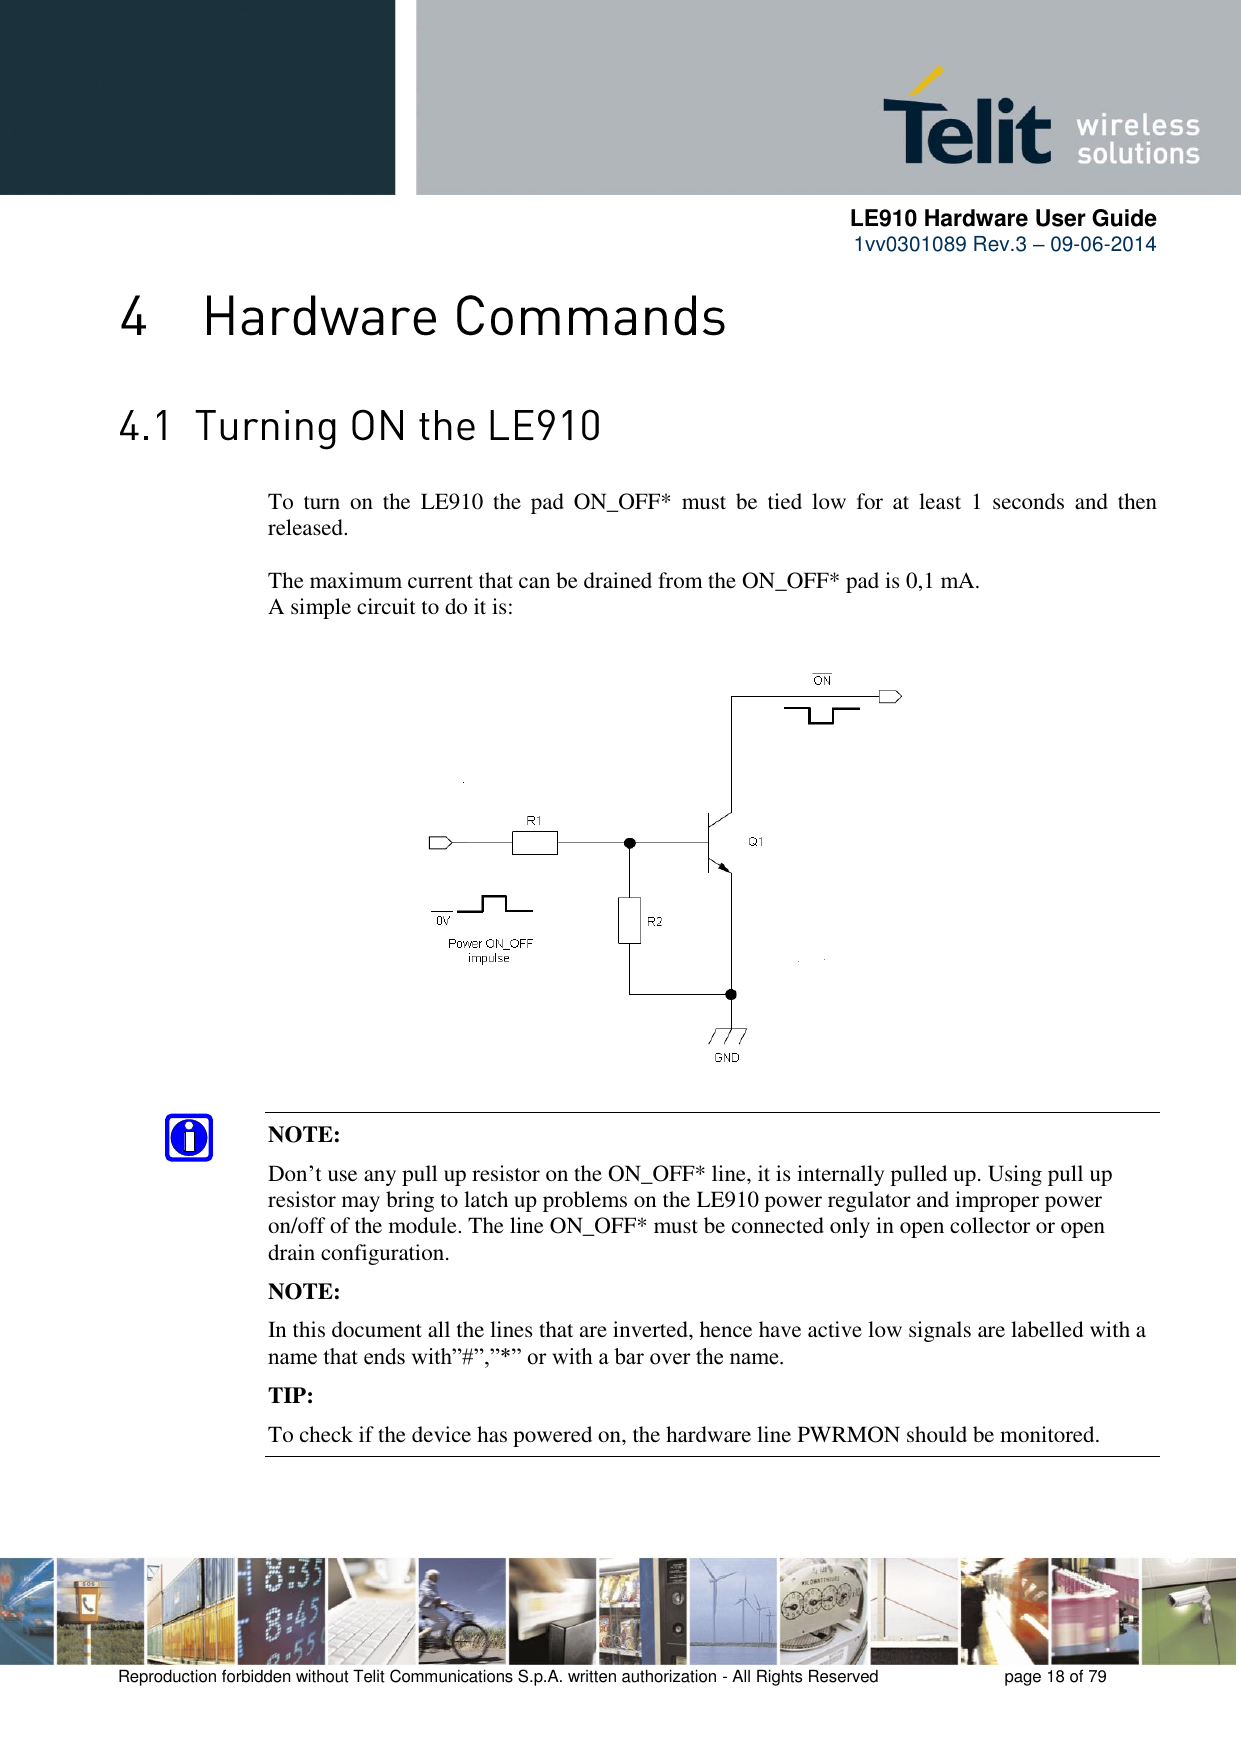      LE910 Hardware User Guide 1vv0301089 Rev.3 – 09-06-2014    Reproduction forbidden without Telit Communications S.p.A. written authorization - All Rights Reserved    page 18 of 79    To  turn  on  the  LE910  the  pad  ON_OFF*  must  be  tied  low  for  at  least  1  seconds  and  then released.  The maximum current that can be drained from the ON_OFF* pad is 0,1 mA. A simple circuit to do it is:                 NOTE: Don’t use any pull up resistor on the ON_OFF* line, it is internally pulled up. Using pull up resistor may bring to latch up problems on the LE910 power regulator and improper power on/off of the module. The line ON_OFF* must be connected only in open collector or open drain configuration. NOTE: In this document all the lines that are inverted, hence have active low signals are labelled with a name that ends with”#”,”*” or with a bar over the name. TIP: To check if the device has powered on, the hardware line PWRMON should be monitored. 